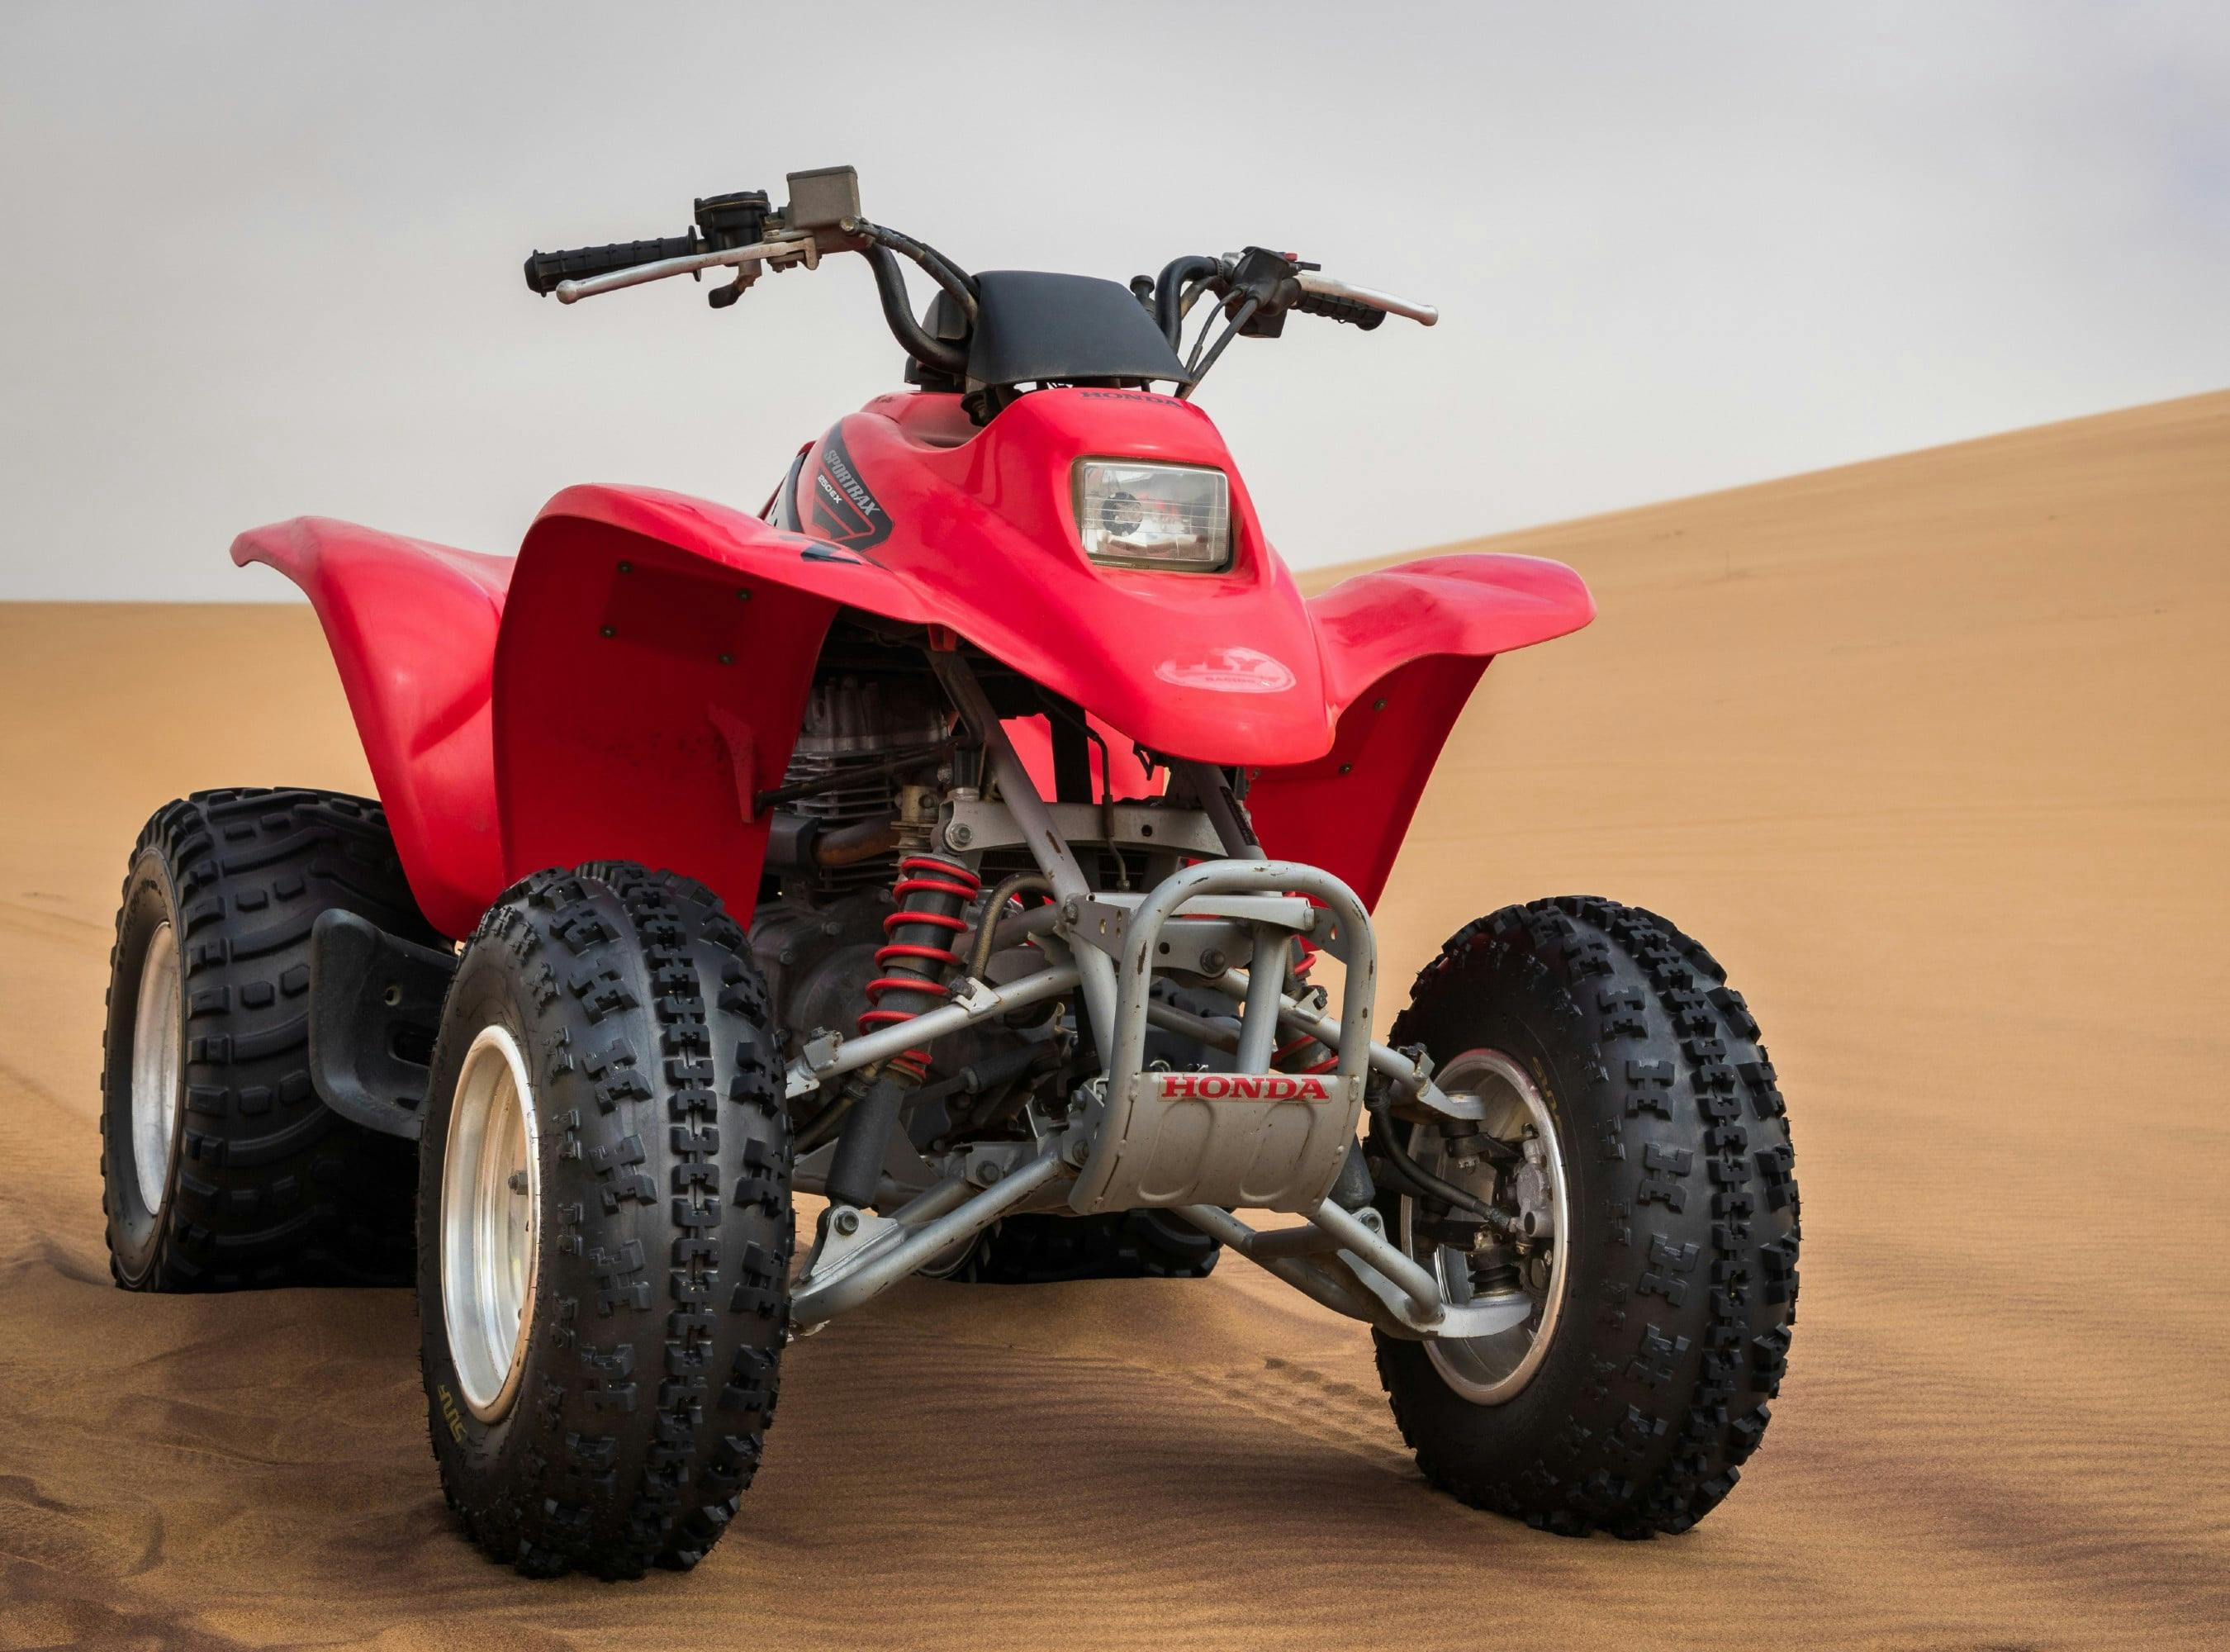 ATV Expert Report Contradicts Victim’s Account of 50 Foot Plunge in Off-Roading Accident